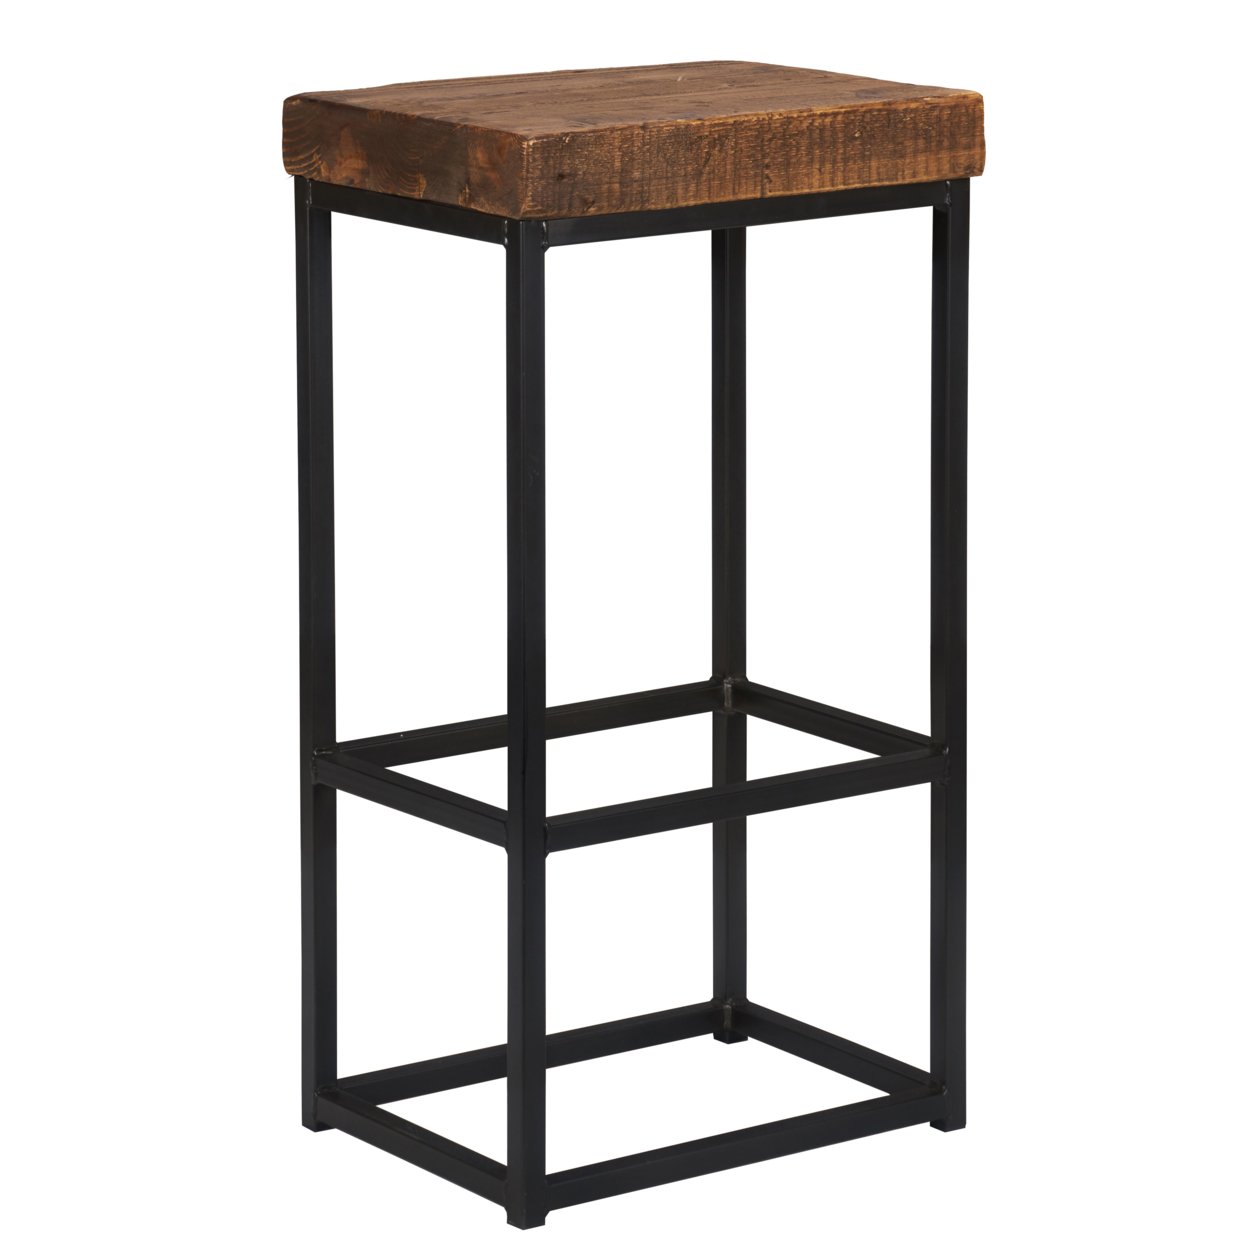 Transitional Style Iron Base Barstool With Wooden Seat, Set Of 2, Brown And Black- Saltoro Sherpi